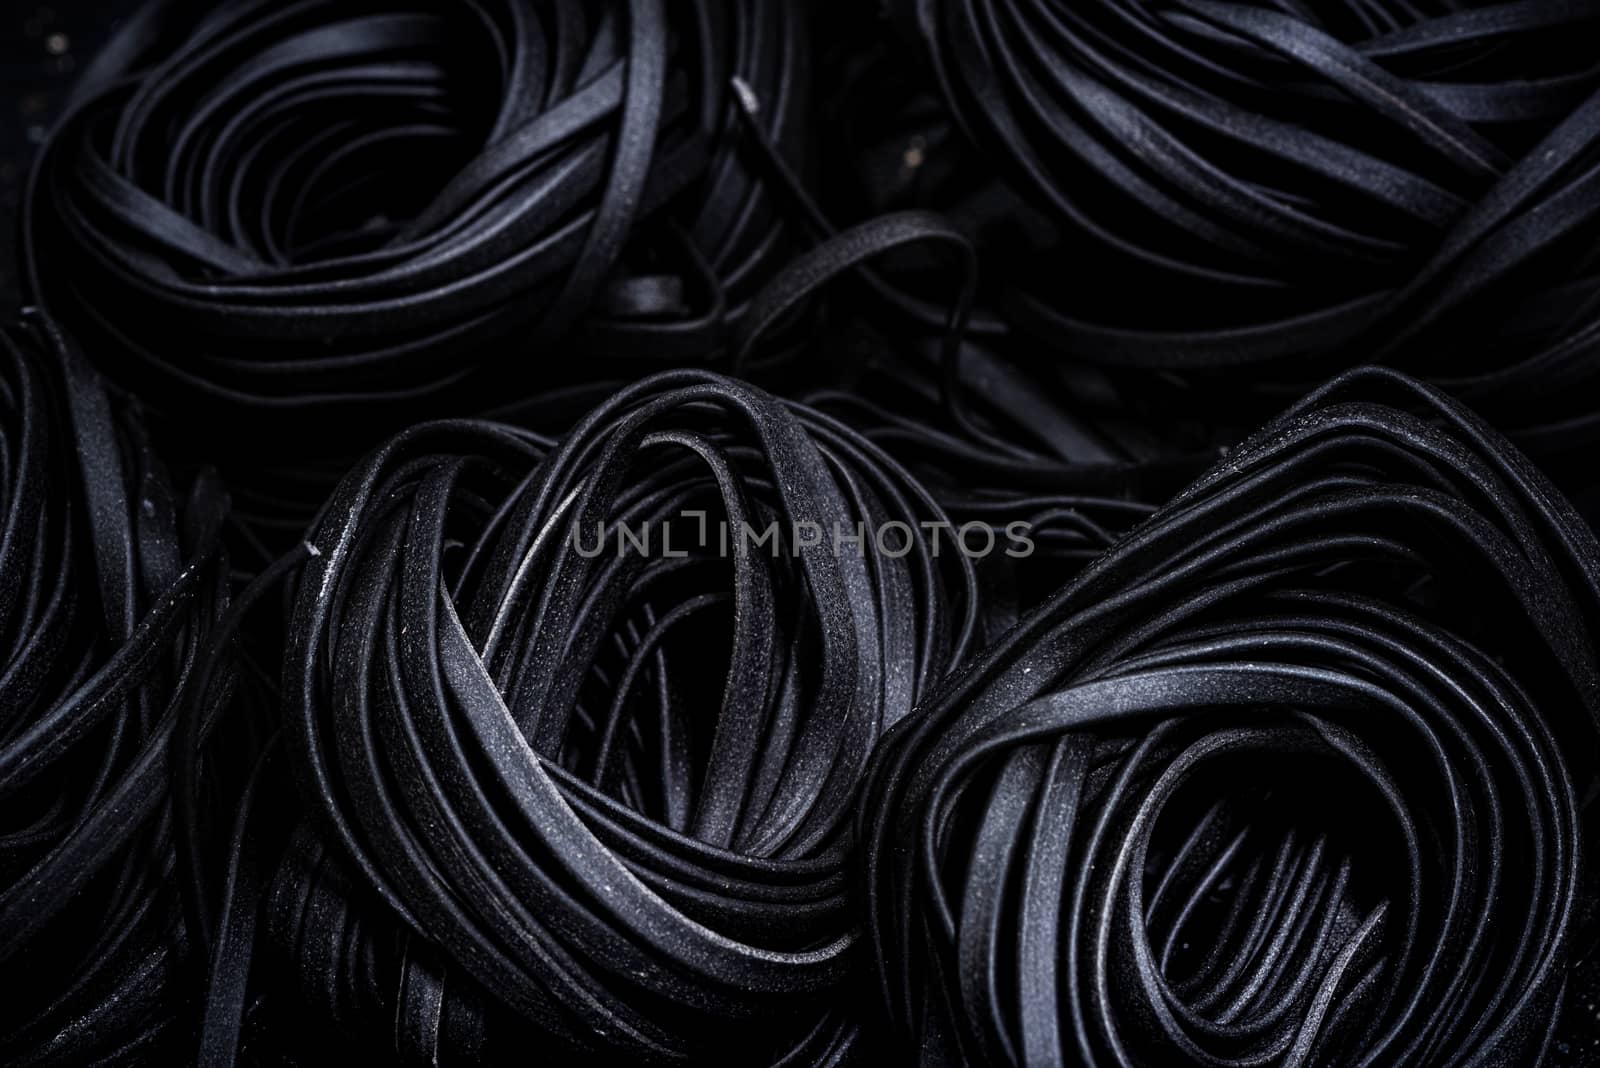 Squid Ink Black Pasta Spaghetti. Close Up View. Food Background.